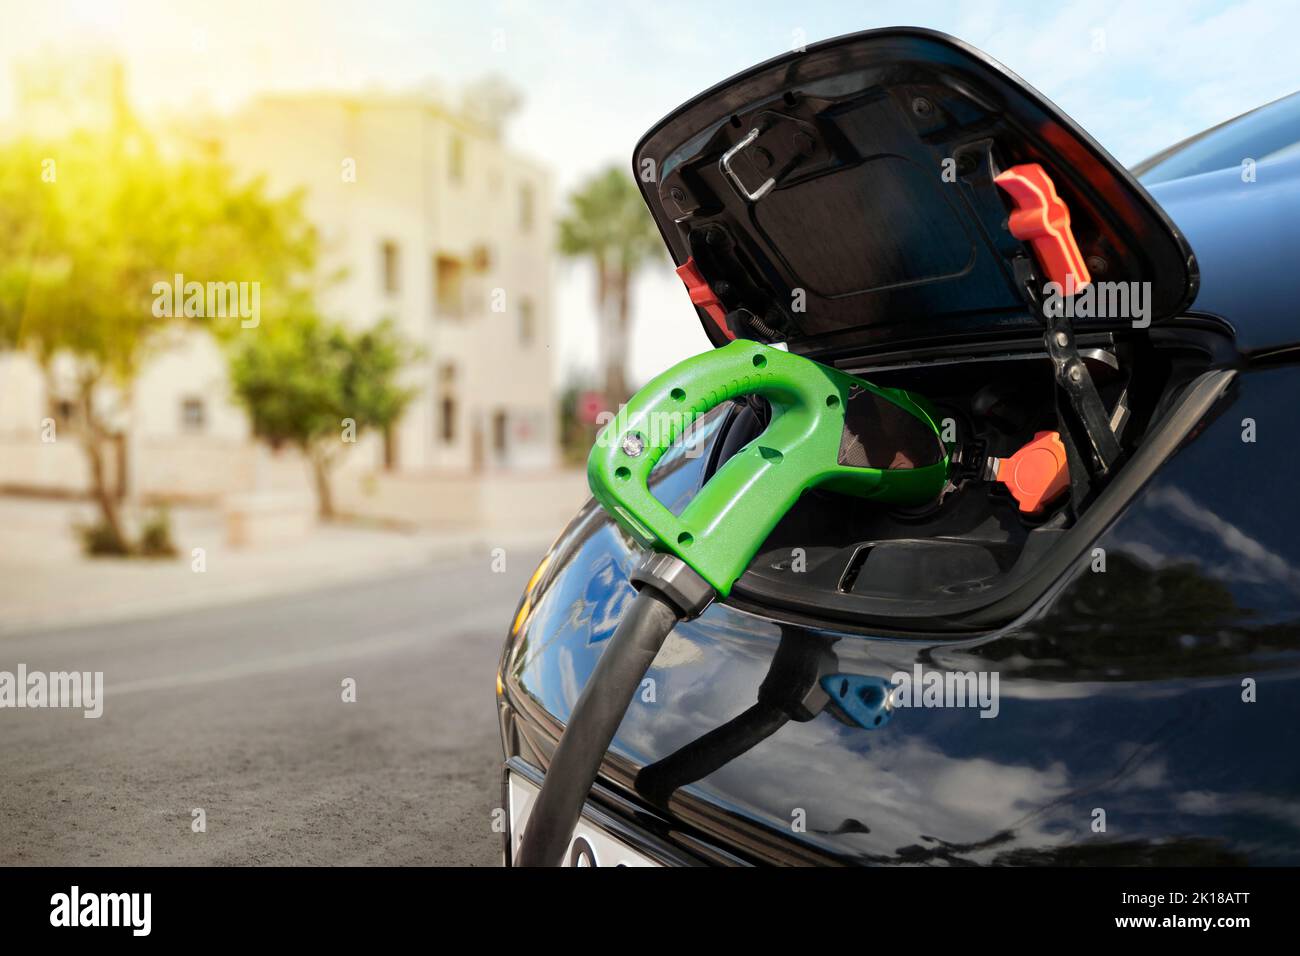 Electric car on charging spot in front of architecture buildings. Car sharing commuter charging station. Charging the batteries of an electric car on Stock Photo